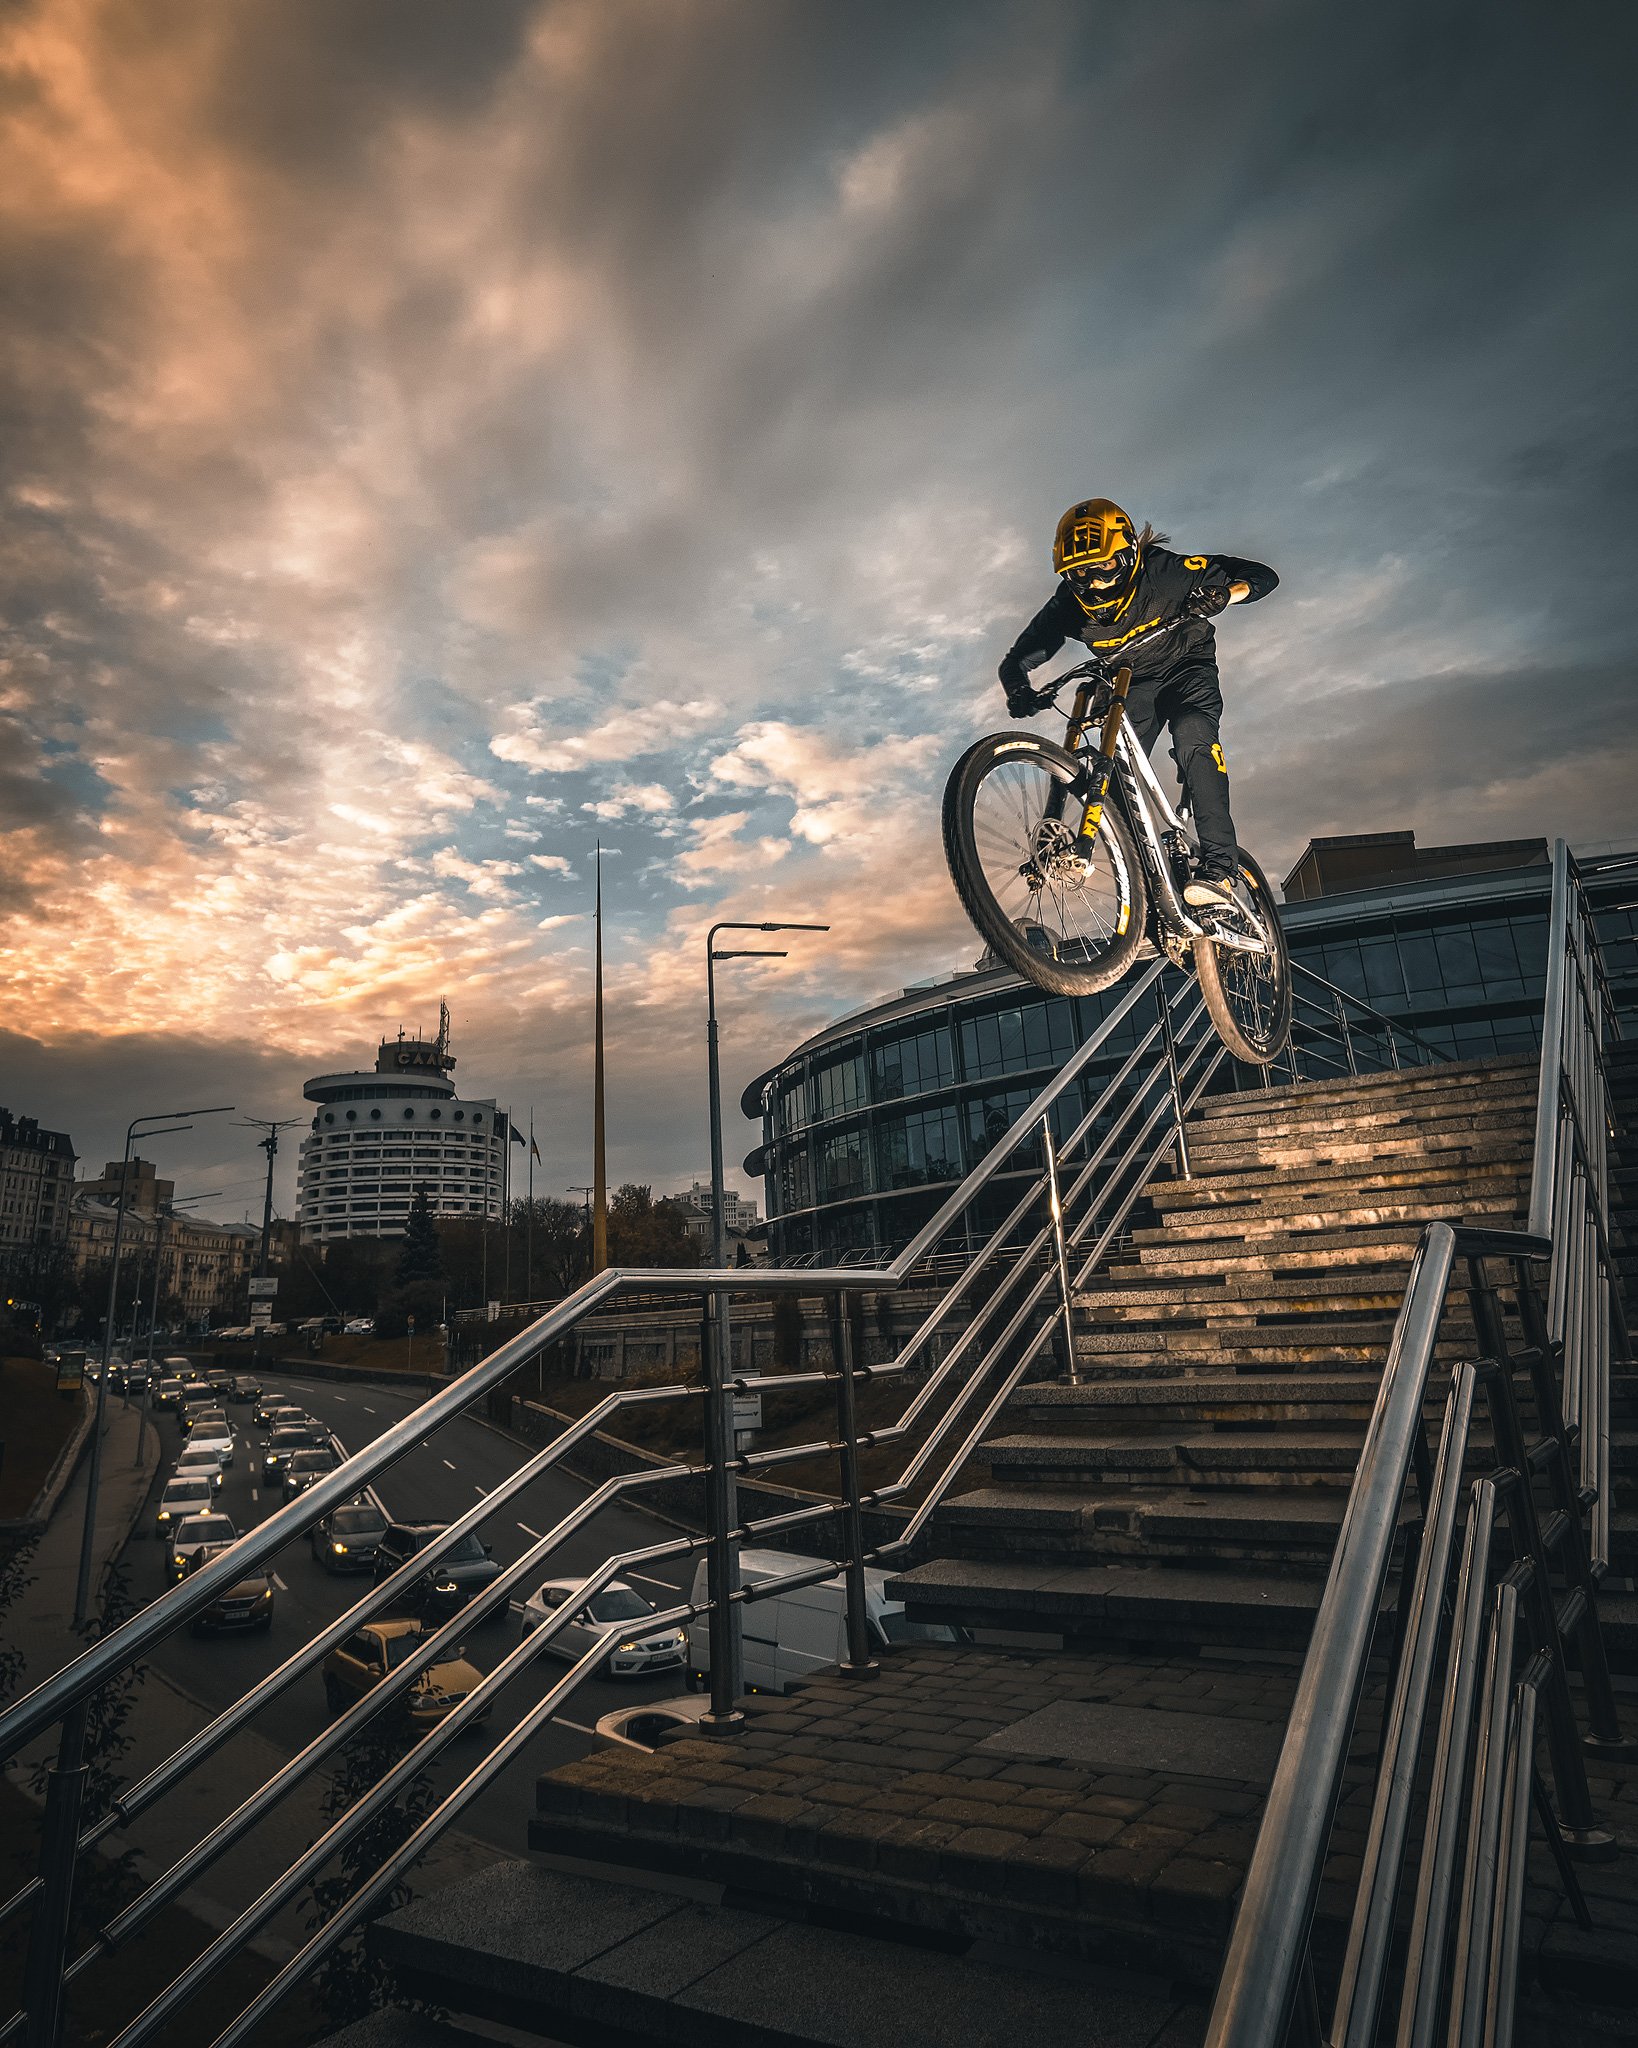 Add tags Tags      Bicycle     Outdoors     Lifestyles     Cycling     Full     Length     Sport     One     Person     Riding     Day     Motion     Skill     City     Life     urban     dh     downhill     jumping     mtb     trick     fullface     ride, Юрий Никитюк